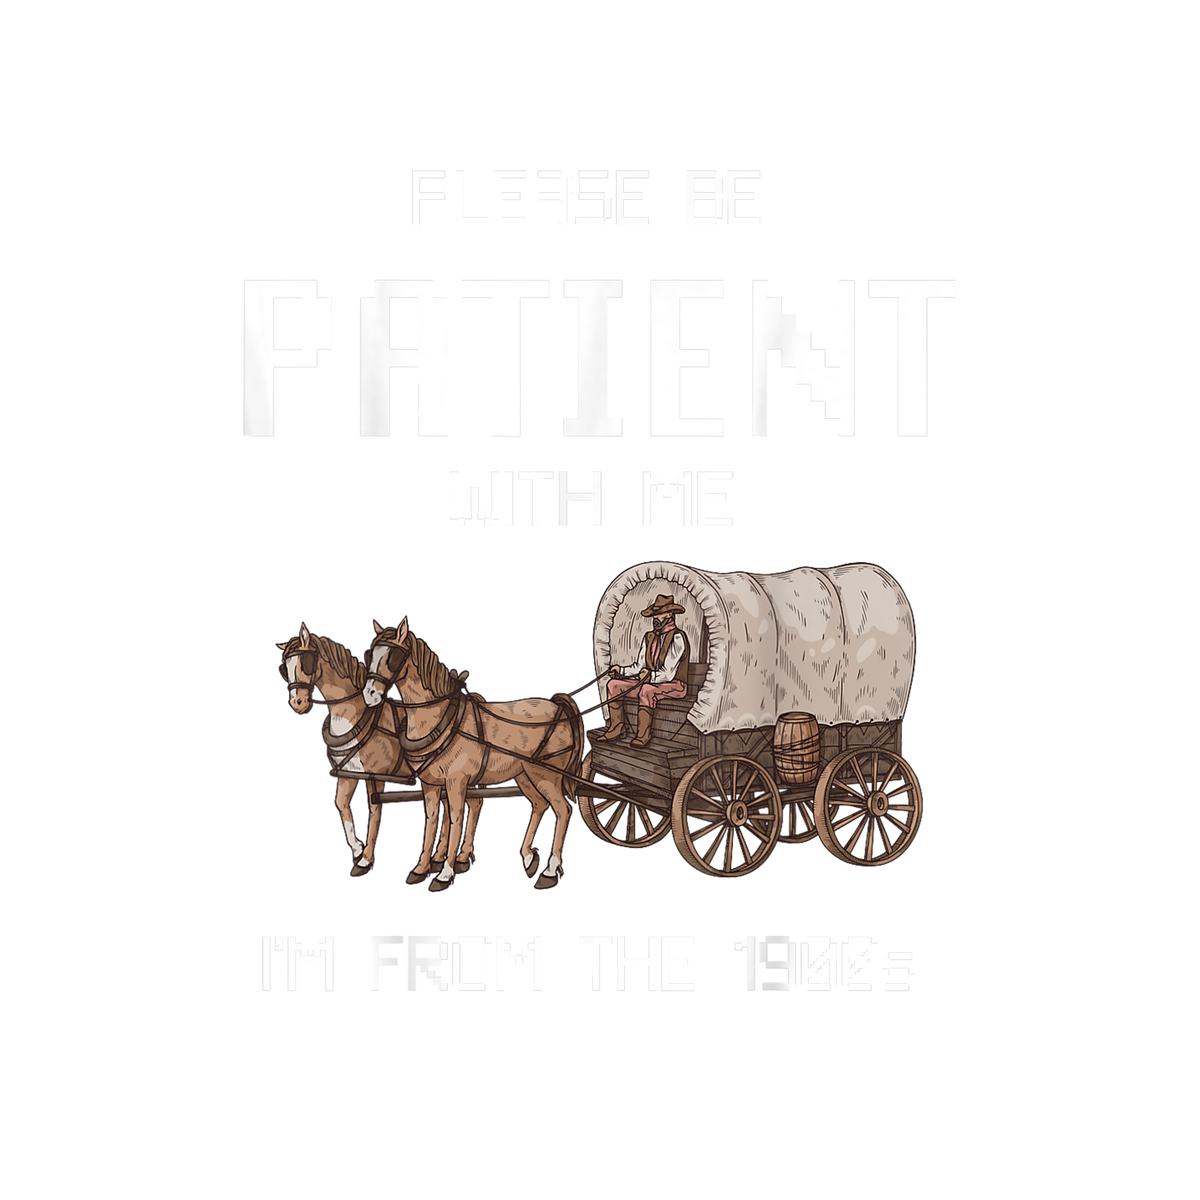 PLEASE BE PATIENT WITH ME